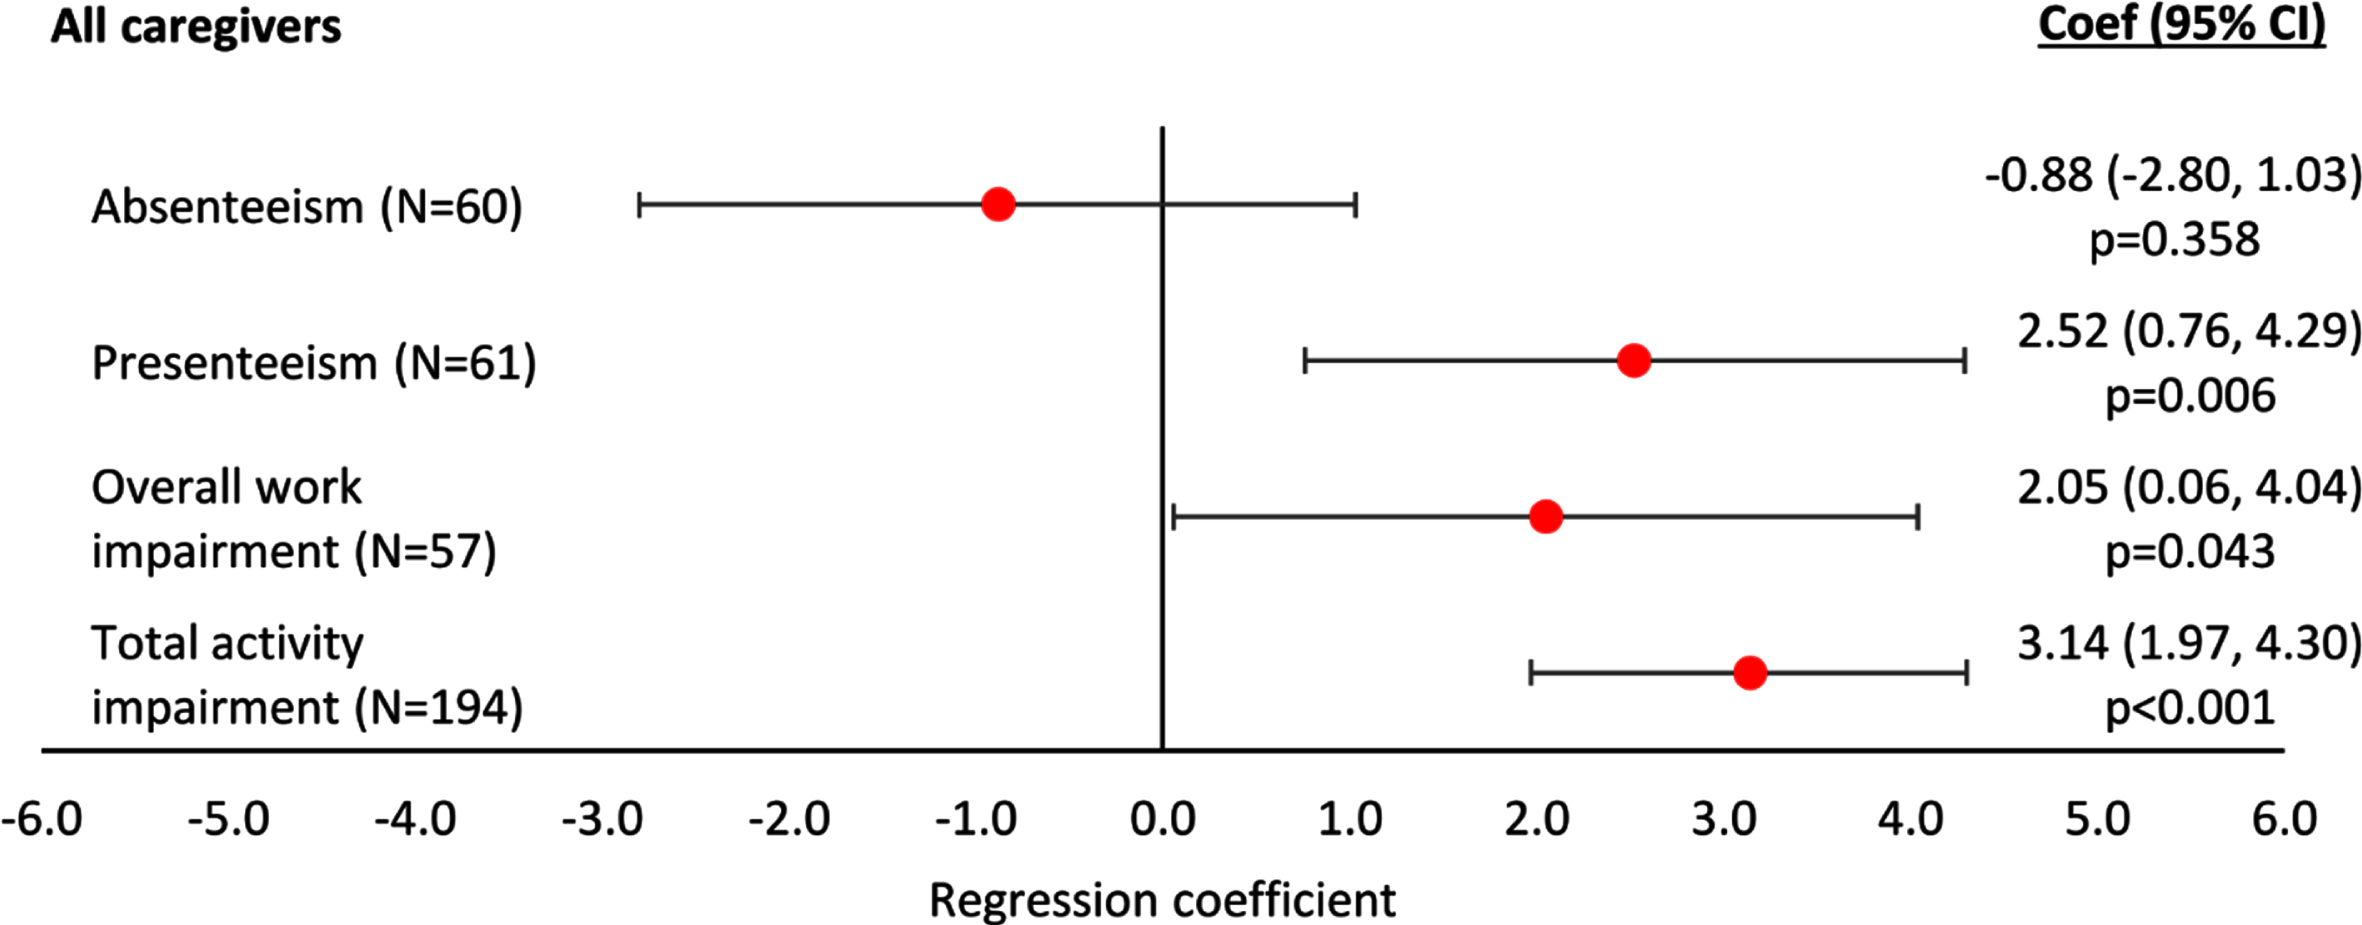 Linear regression analysis of WPAI-assessed productivity and activity by agitation score –all patients. A regression coefficient significantly different from 0 indicates the predicted outcomes differs significantly for different agitation scores; a coef > 0 implies a worse outcome with higher agitation scores, a coef < 0 implies a better outcome with higher agitation scores. All regressions were controlled for patient demographics (age and sex) and clinical characteristics (time since diagnosis, current MMSE score). Coef, coefficient; CI, confidence interval; MMSE, Mini-Mental State Examination; WPAI, Work Productivity and Activity Index.